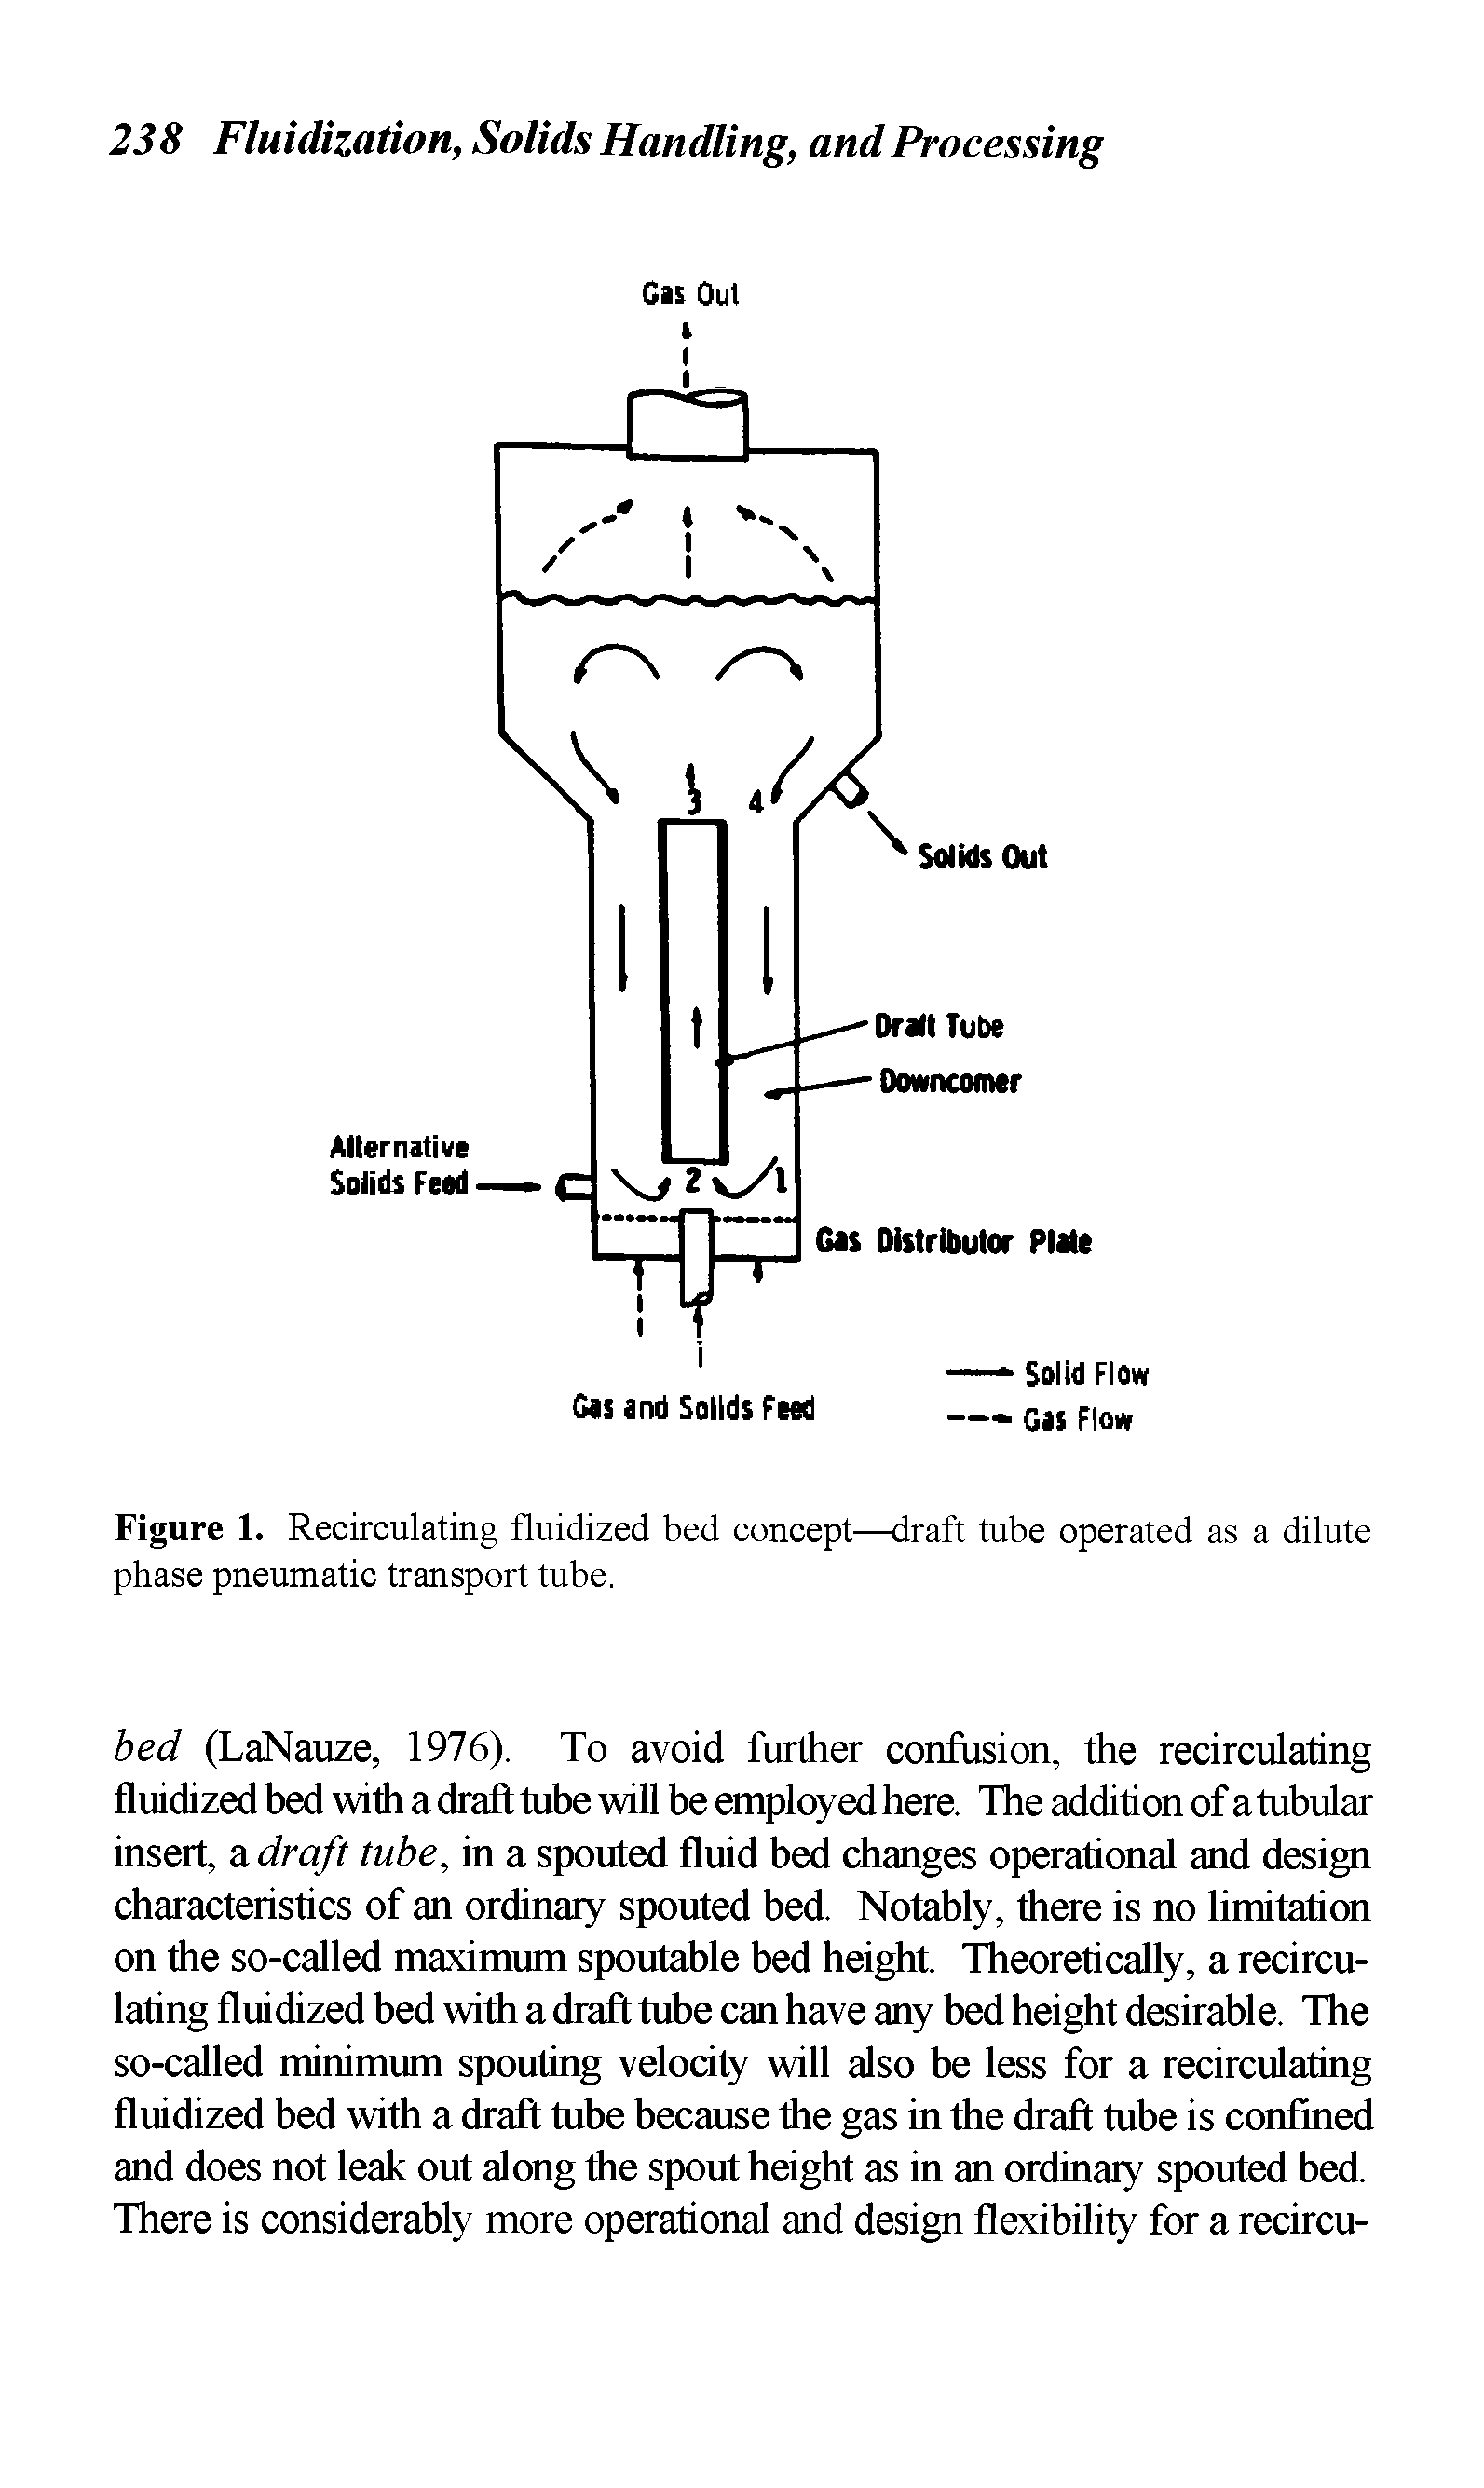 Figure 1. Recirculating fluidized bed concept—draft tube operated as a dilute phase pneumatic transport tube.